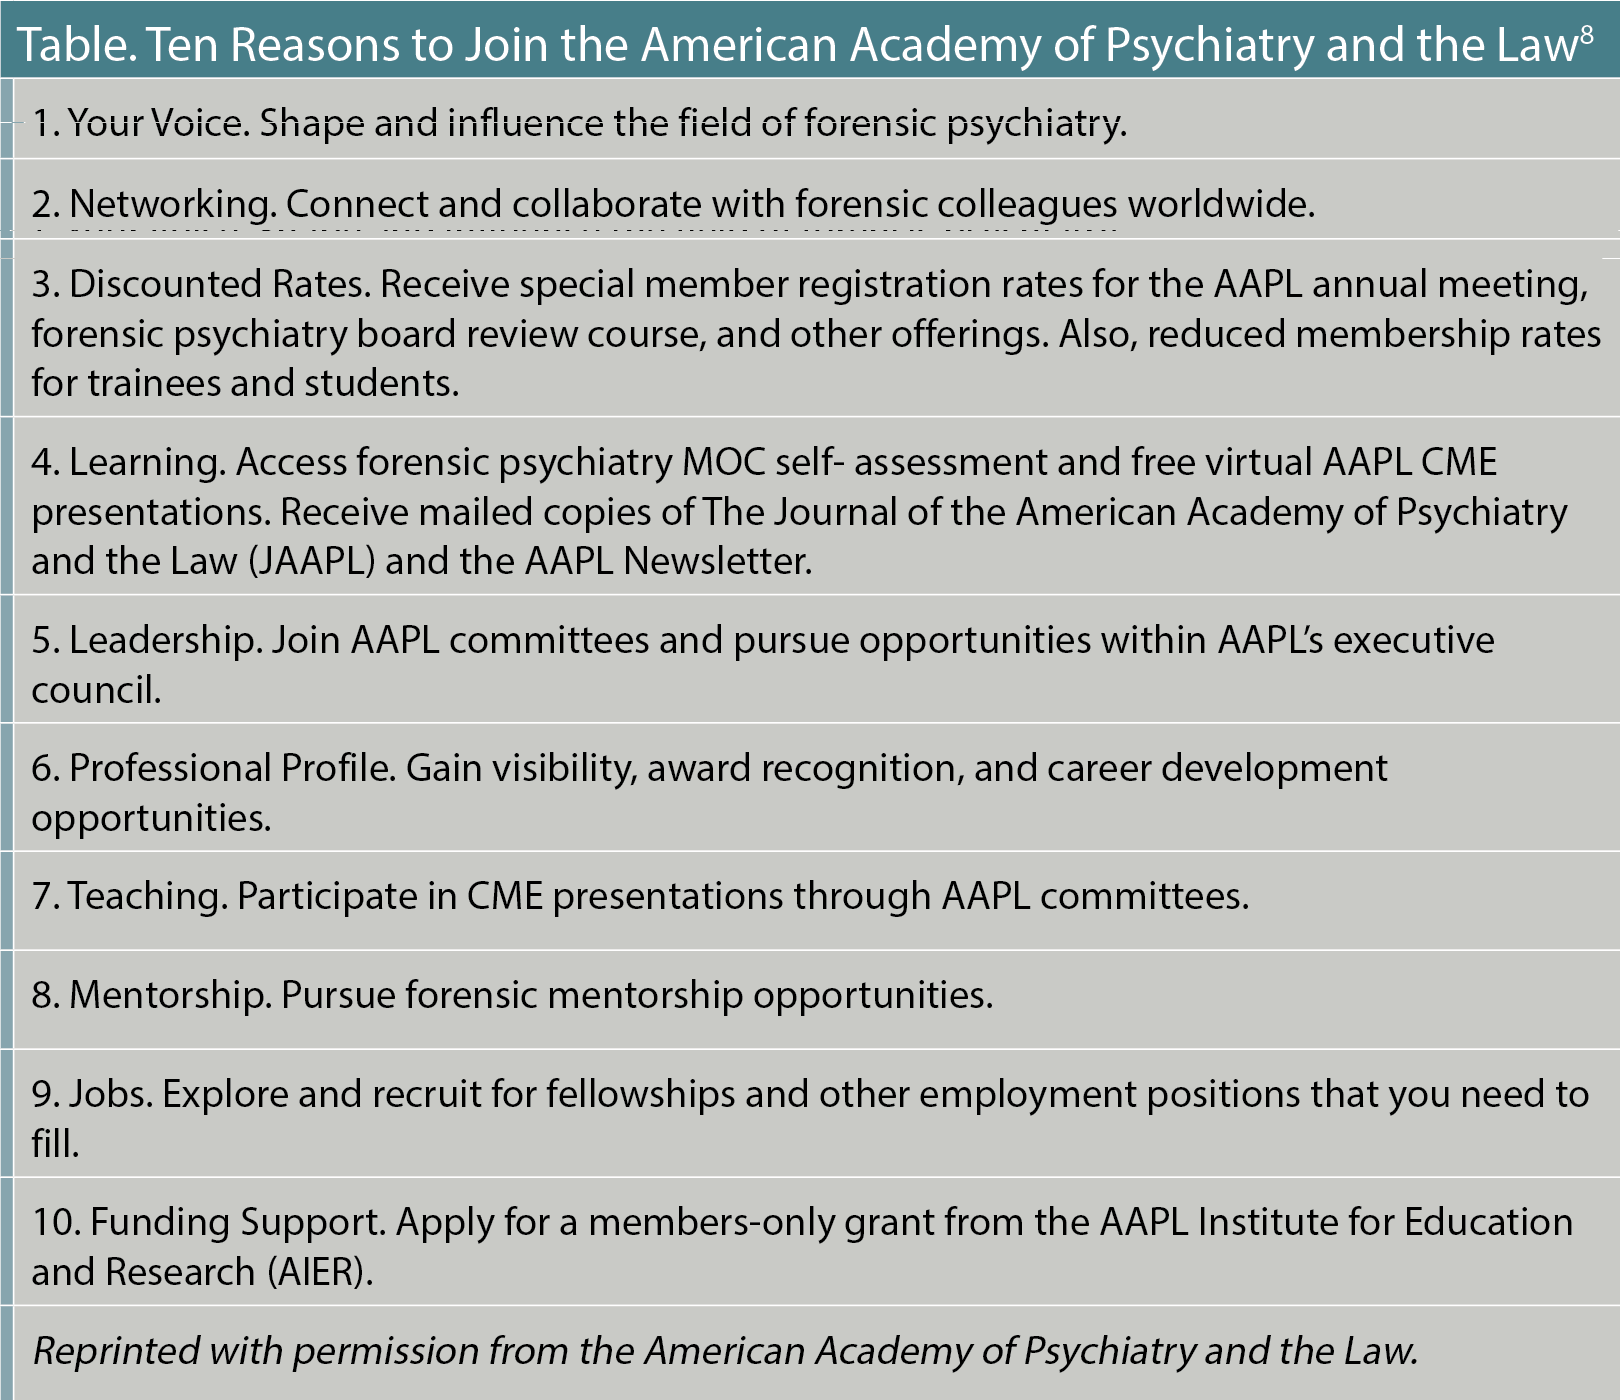 Table. Ten Reasons to Join the American Academy of Psychiatry and the Law